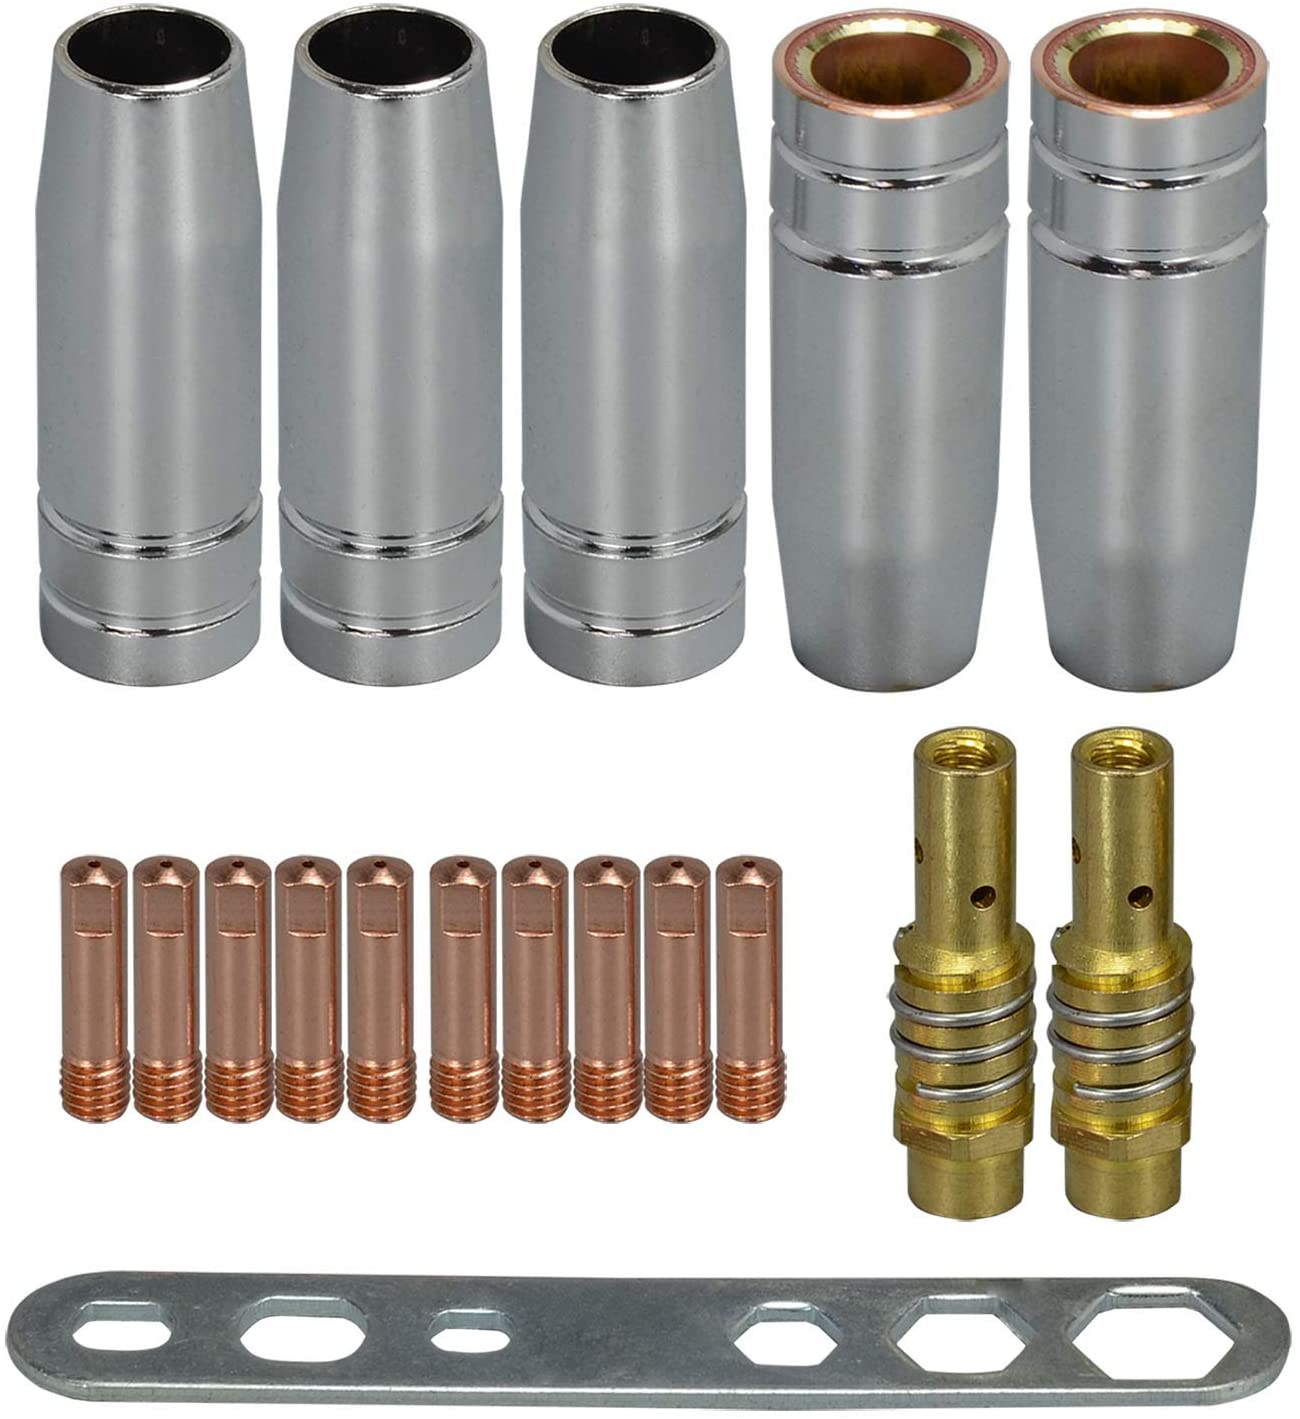 MB15 15AK Contact Tip M6 & Tips Holder Difuser & Shield cup & Torch Neck MIG Welding Torch (M6 Tips .035'' kit 18pcs) 